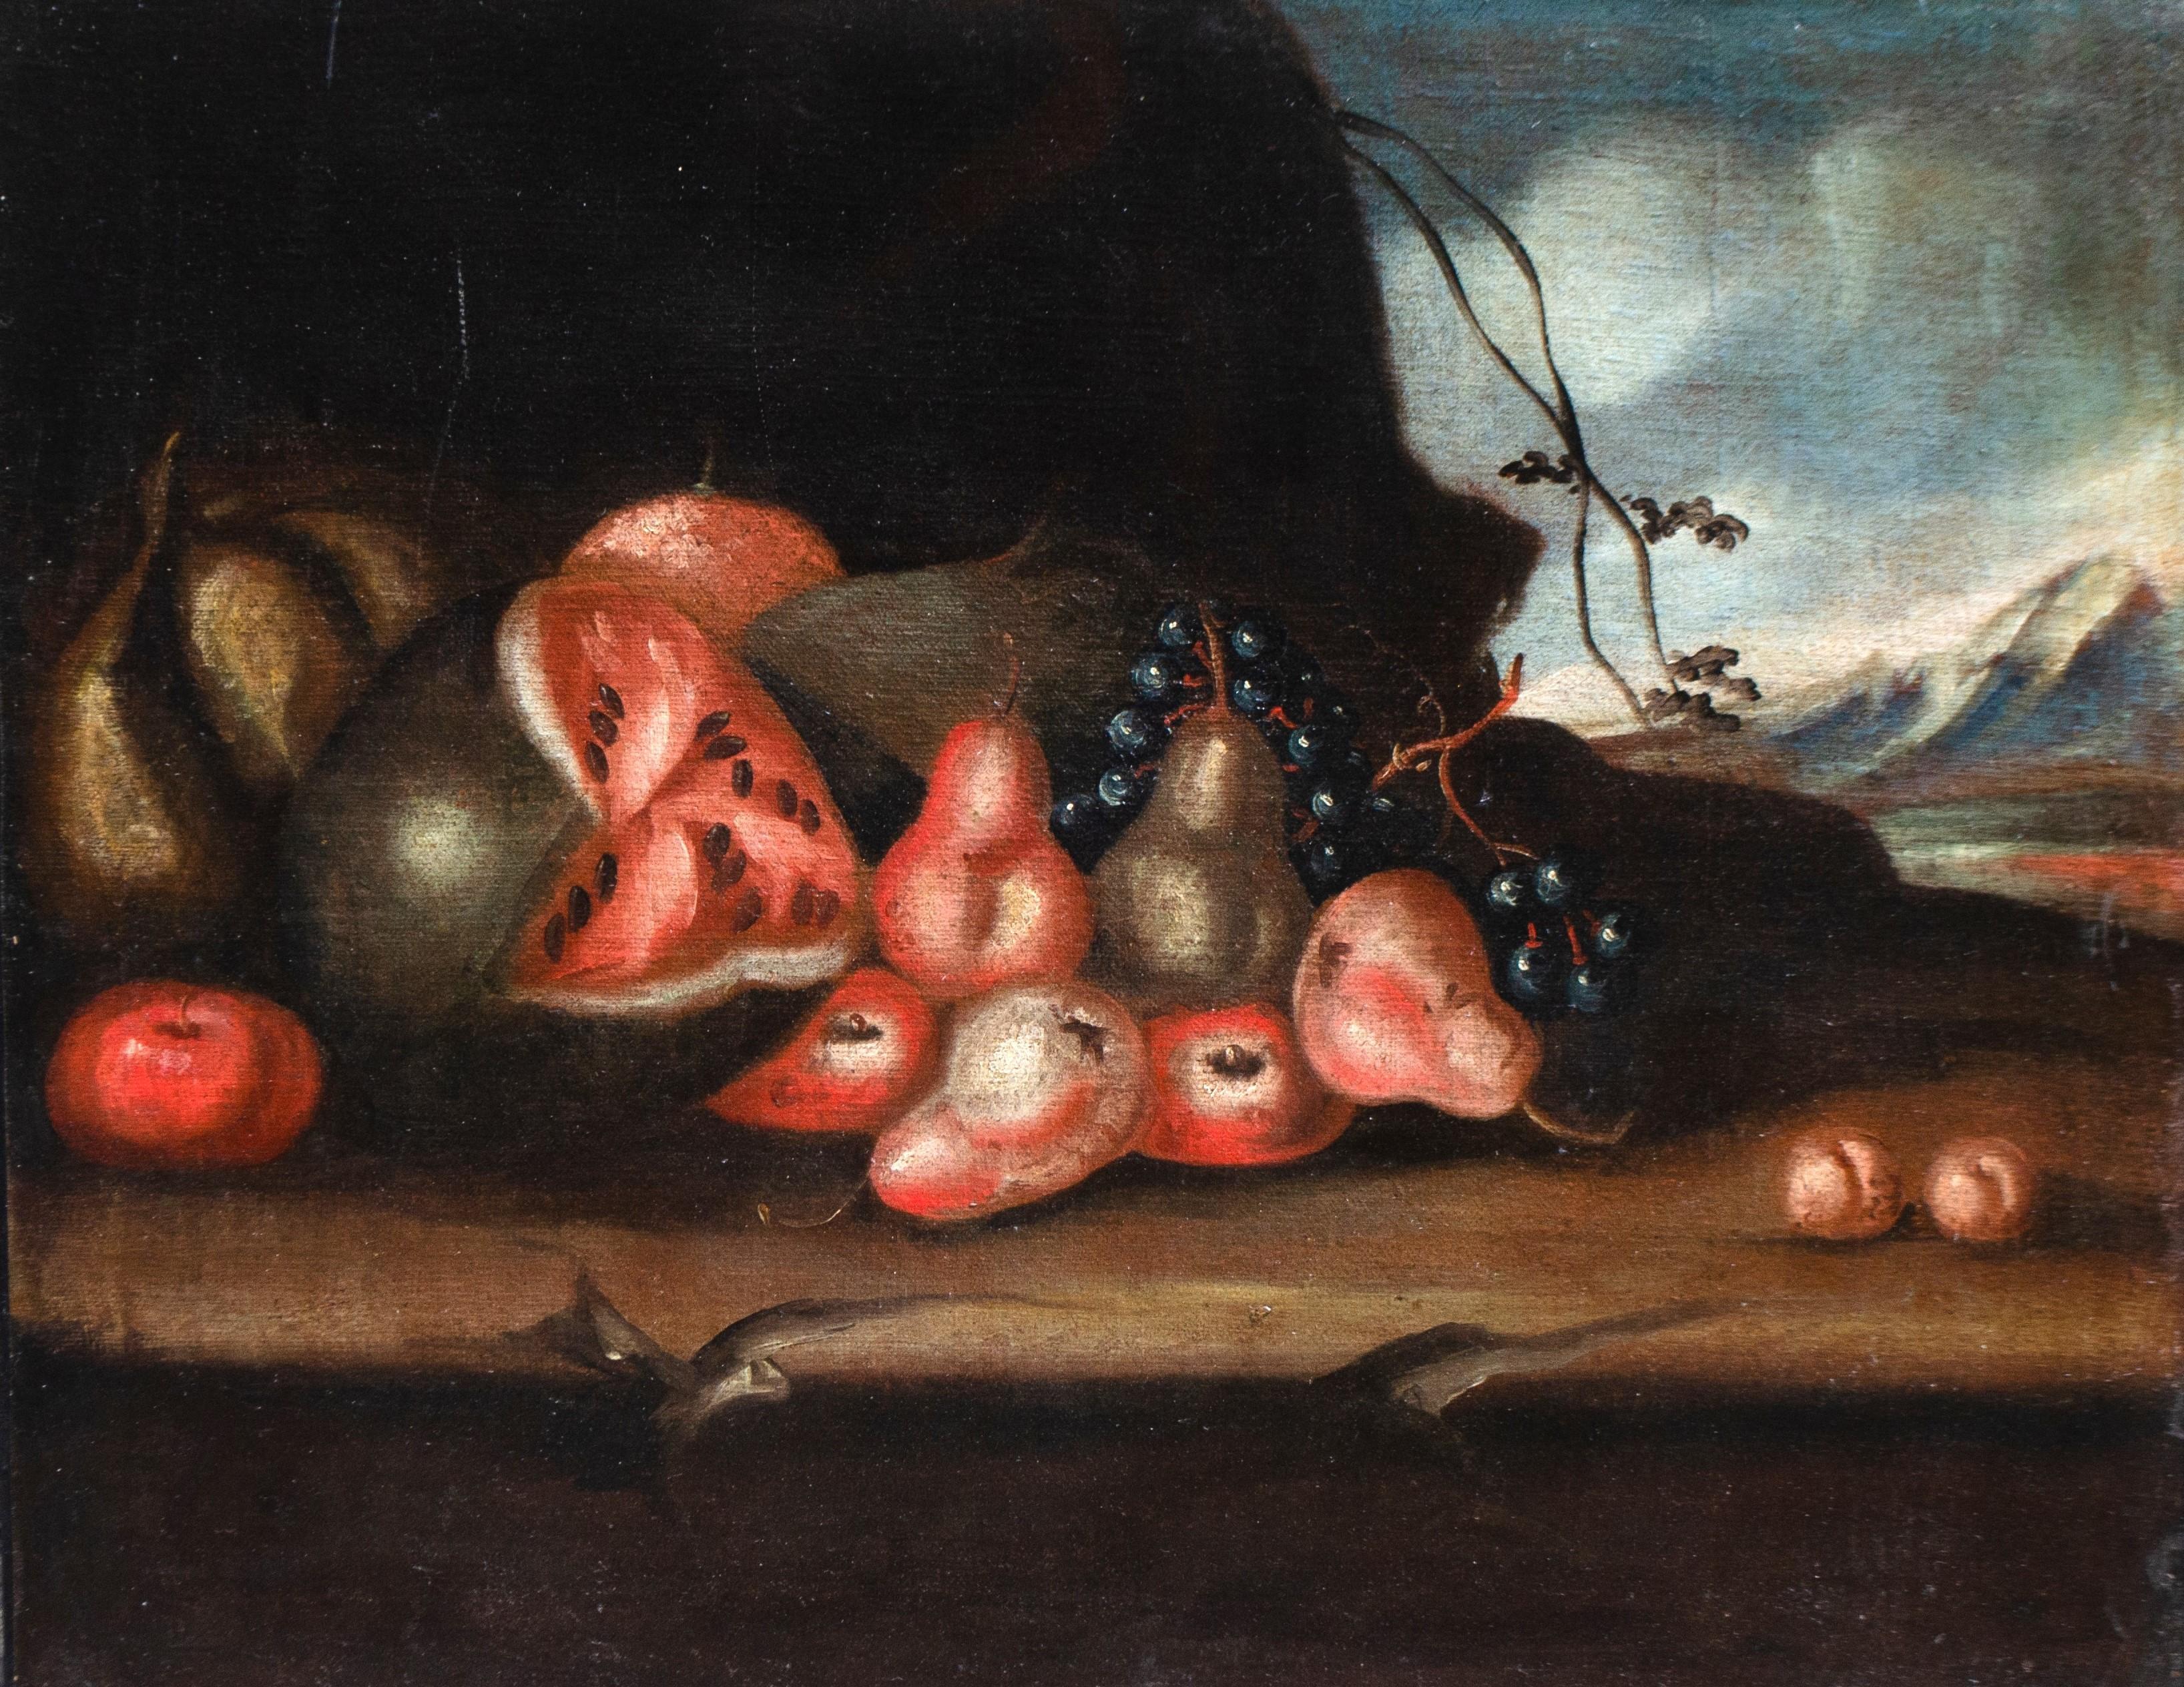 Unknown Still-Life Painting - Still Life With Watermelon, Pears, And Grapes. Lombard School Of The 17th-18th C